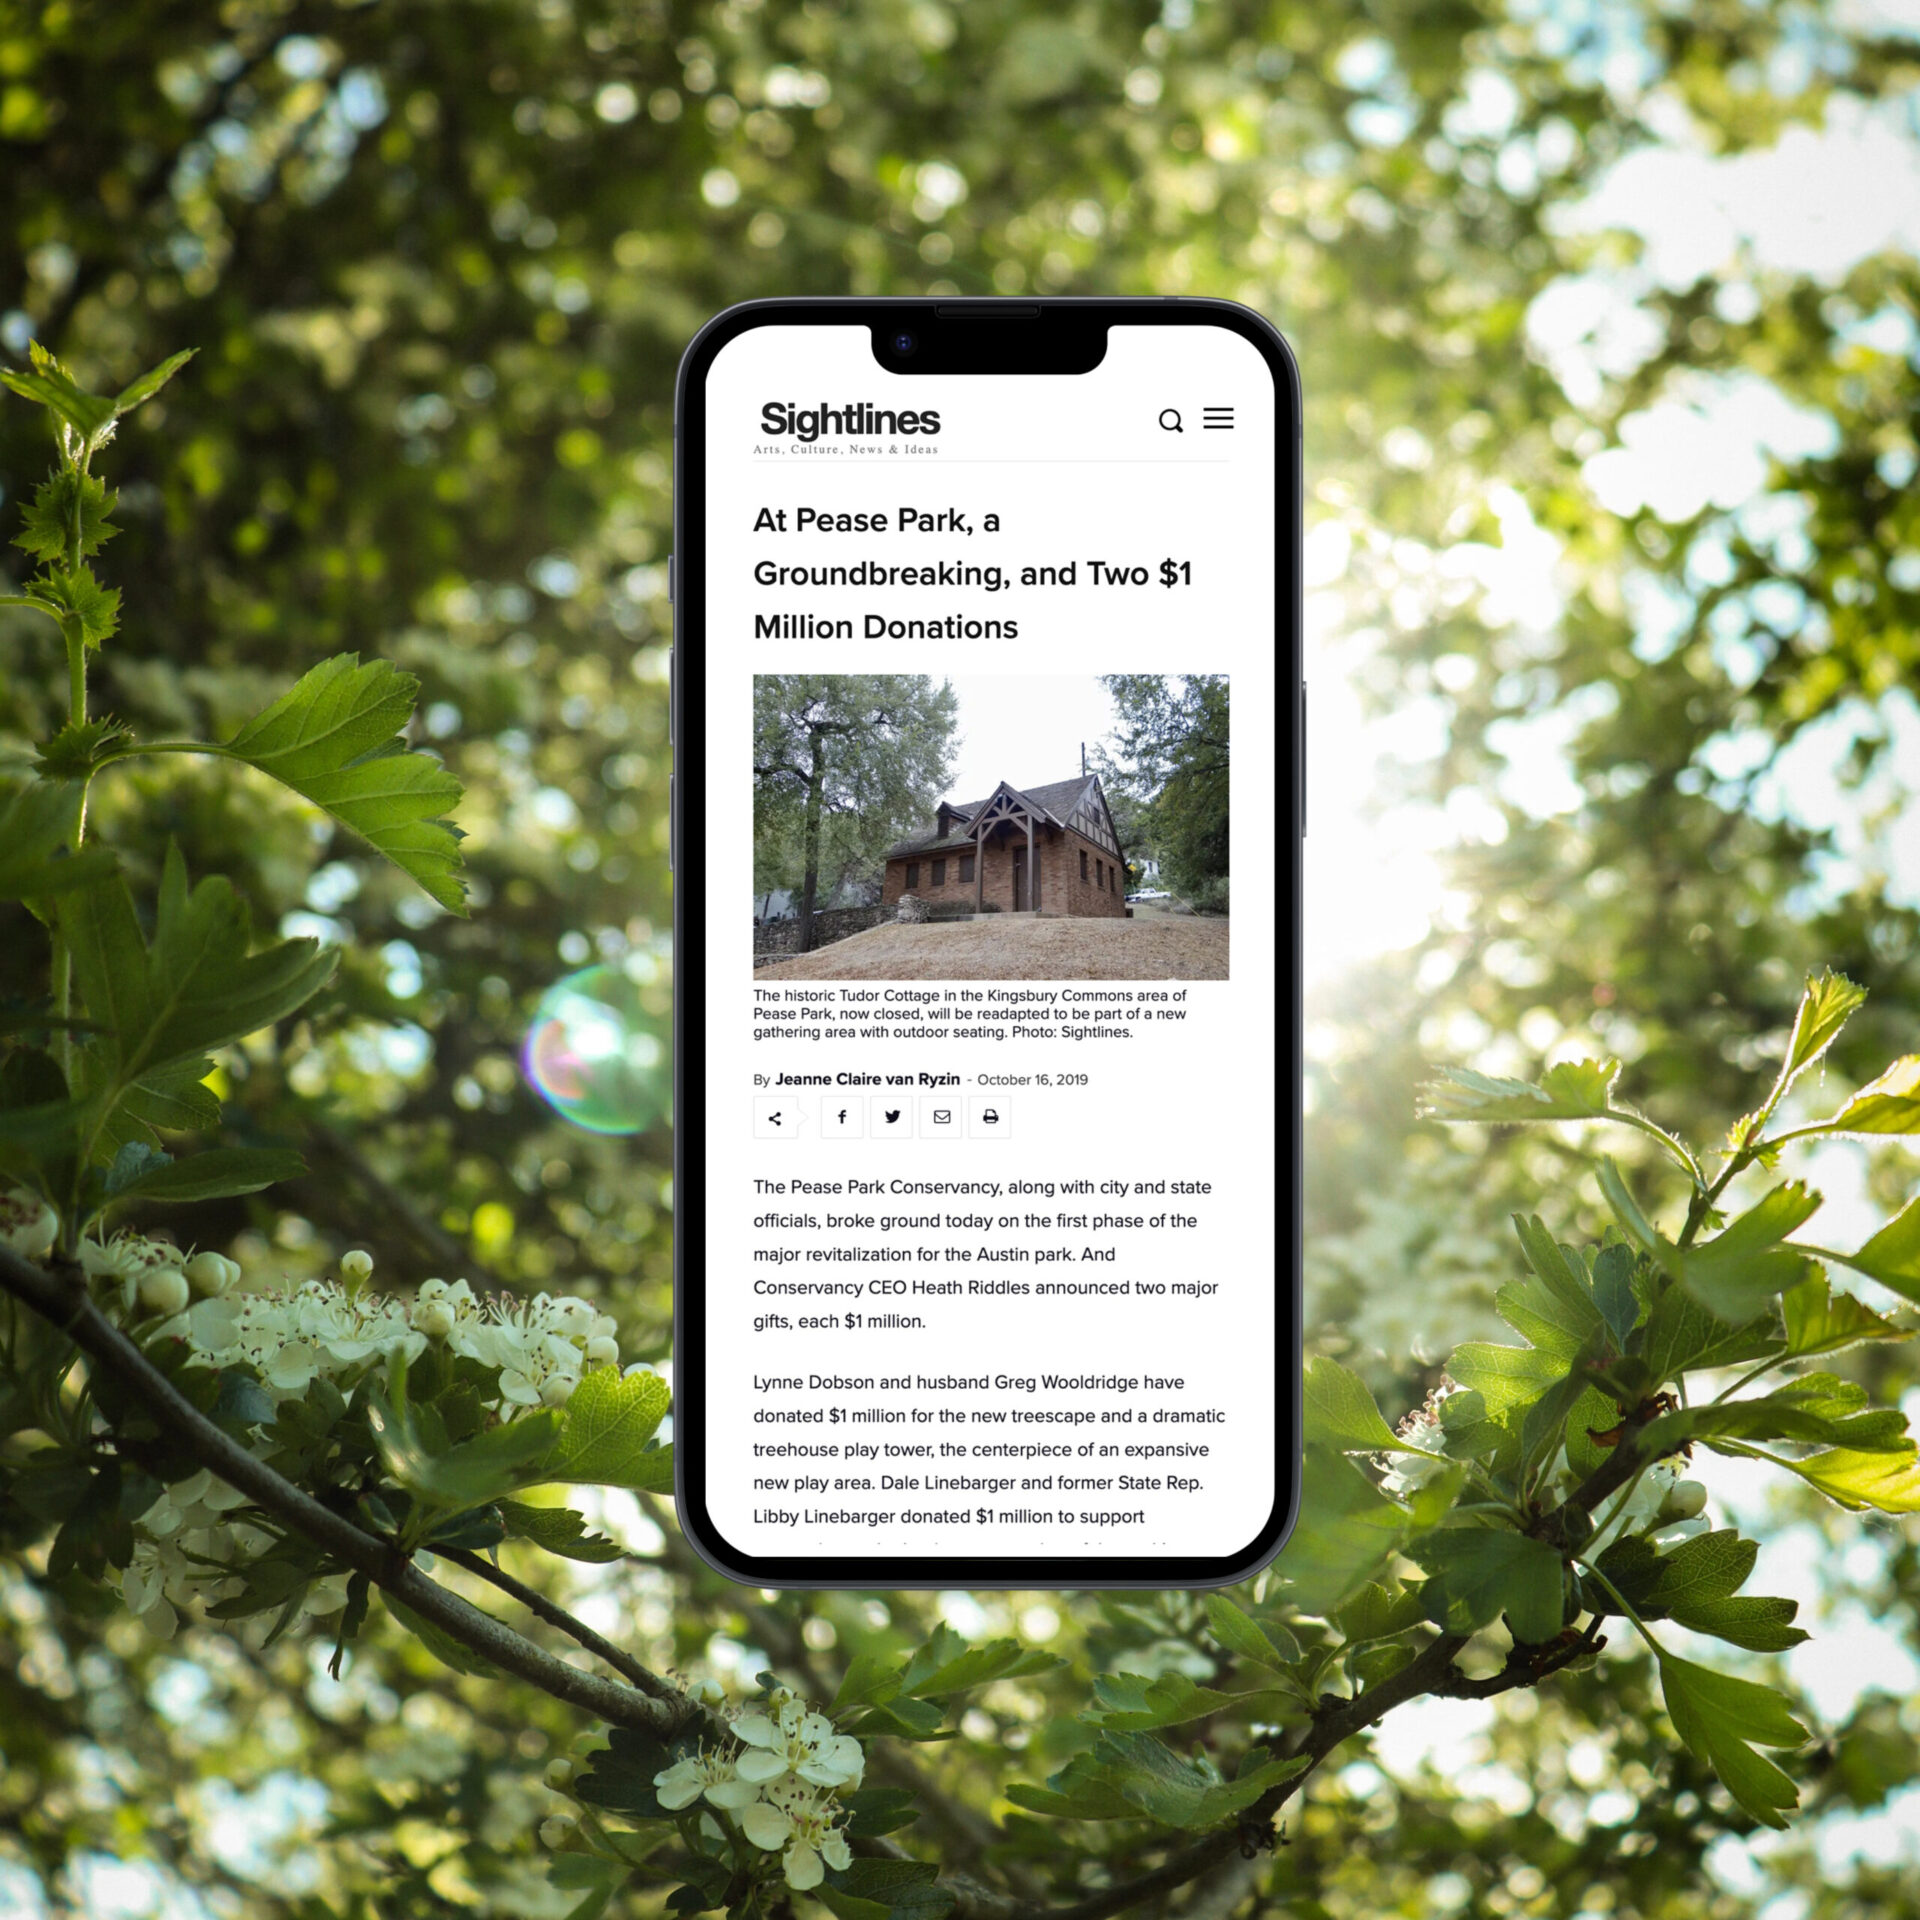 iphone mockup of Pease Park coverage in Sightlines